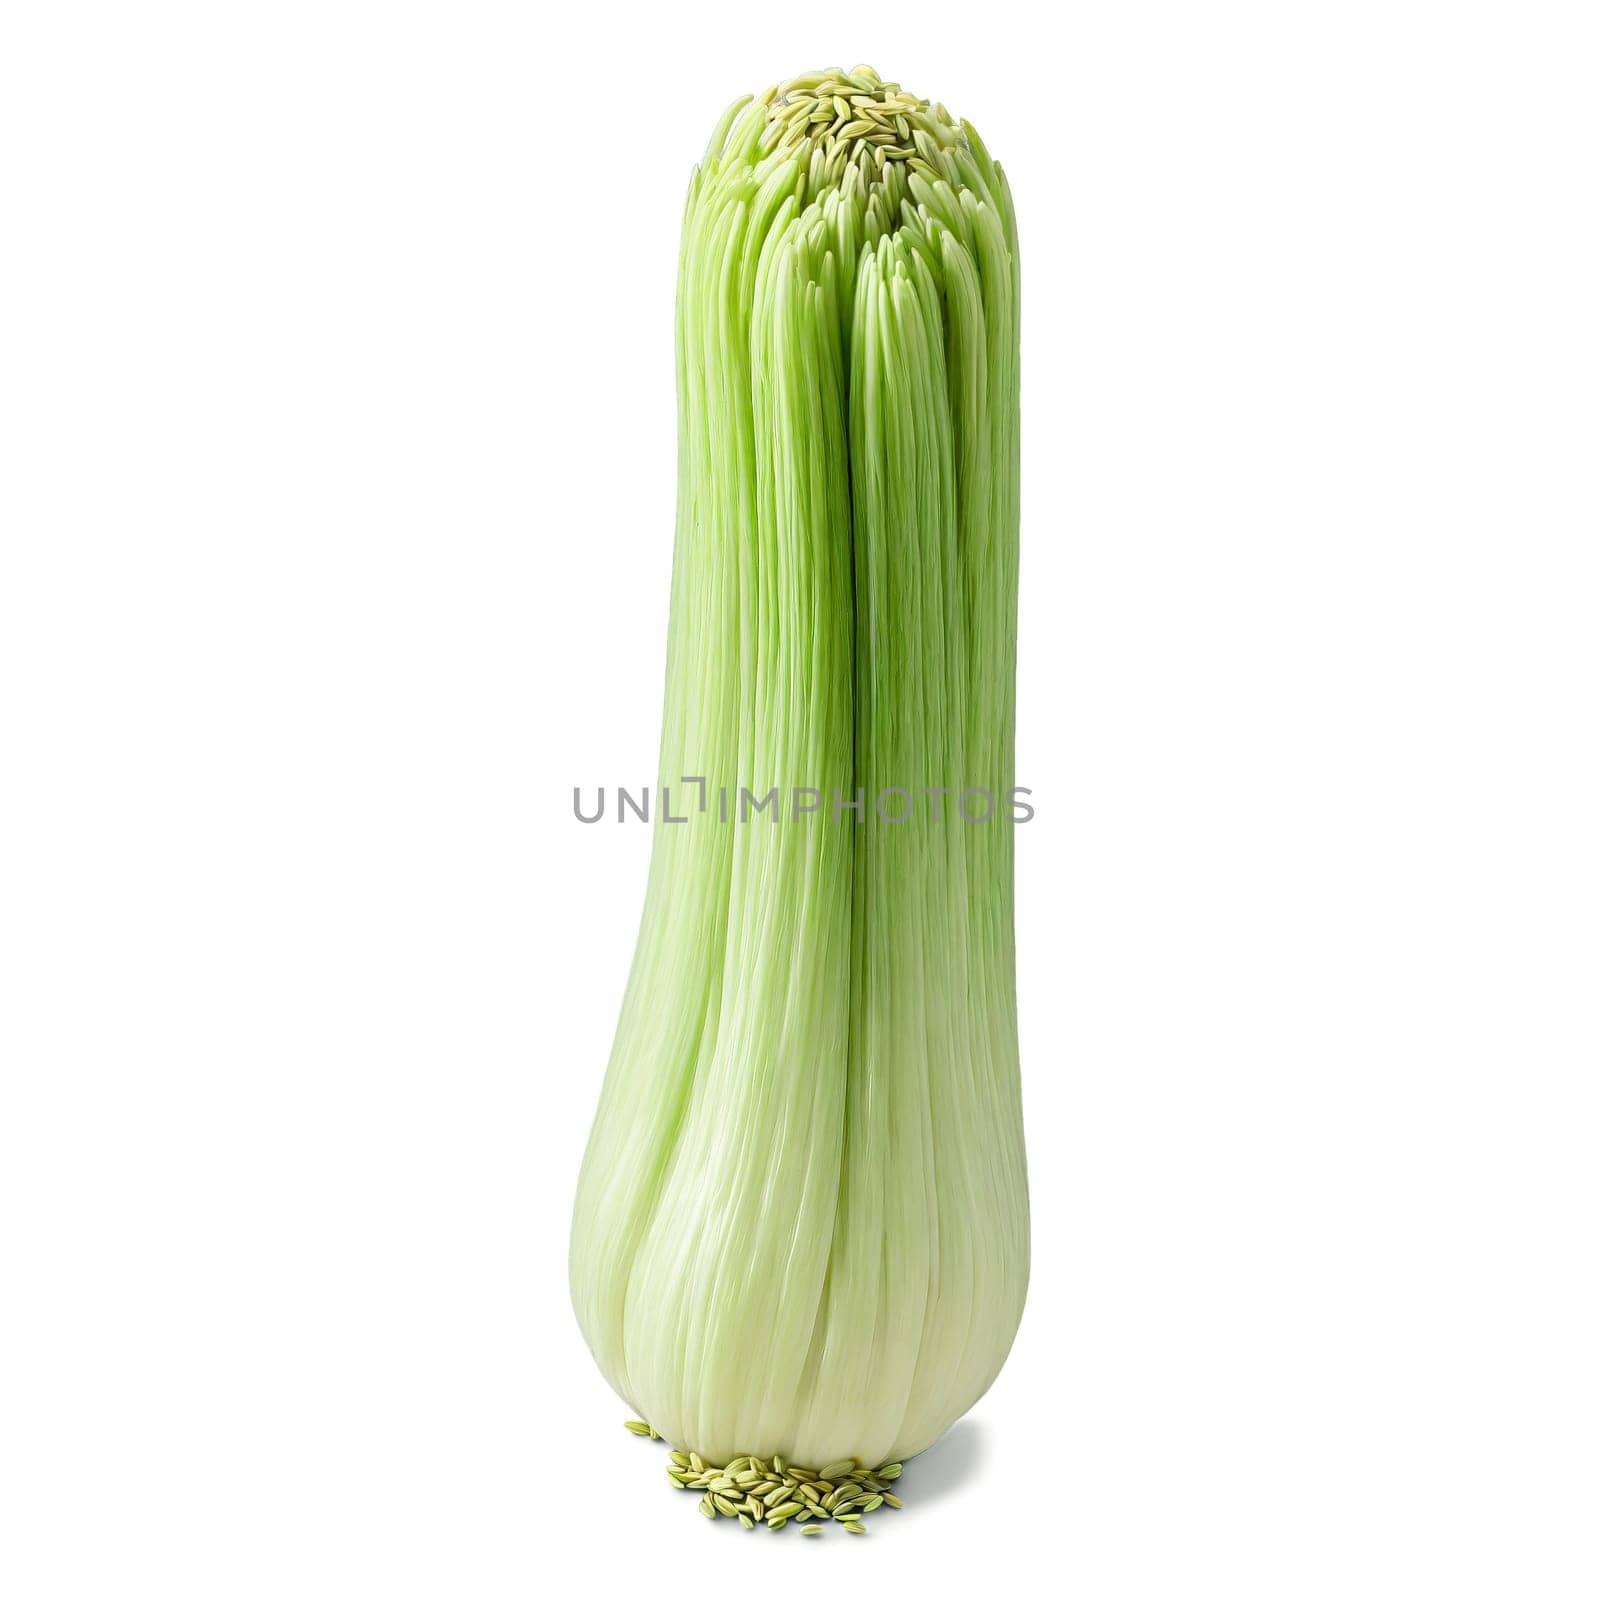 Whole fennel seeds pale green color elongated shape ridged texture Food and culinary concept by panophotograph